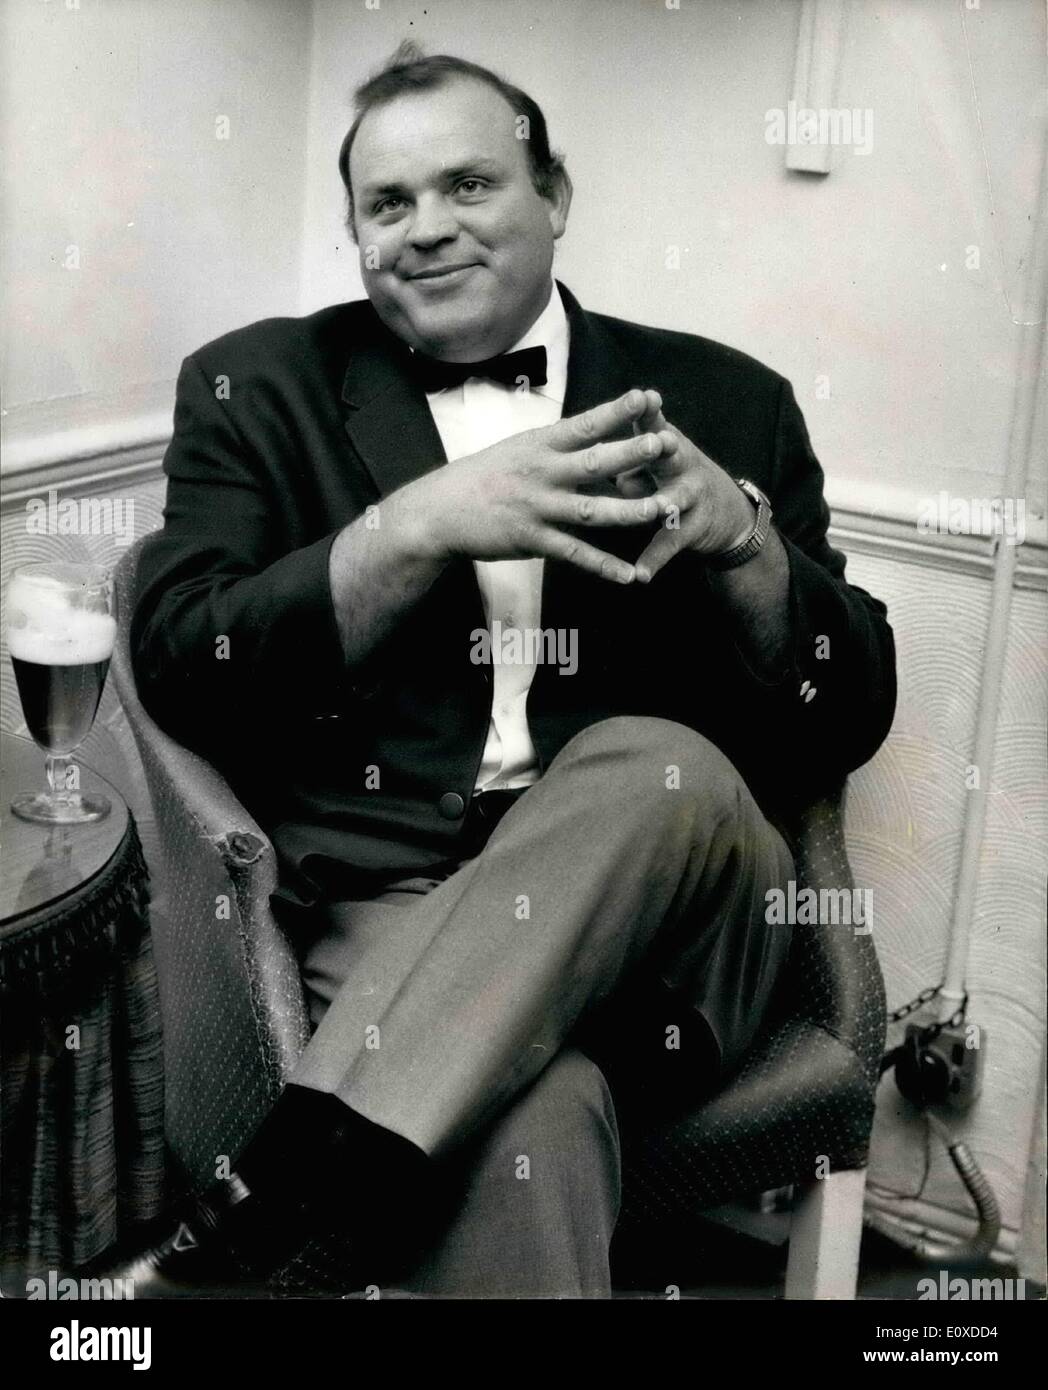 May 05, 1966 - Dan Blocker in London: On Television, actor Dan Blocker - all 20 stone and six feet four-and-a-half-inches of him - is cowboy Hoss Cartwright - in the Bonanza series. But of screen, many surprising things emerge about Mr.Blocker. Like when he sqeezed his massive frame into a chair in the London Palladium's star dressing room yesterday - and talked of poetry, literature and teaching. The fact is, he has an M A degree in English literature. And he said: ''About four years ago I tried to go back to my old job of teaching. ''But it would have been impossible Stock Photo